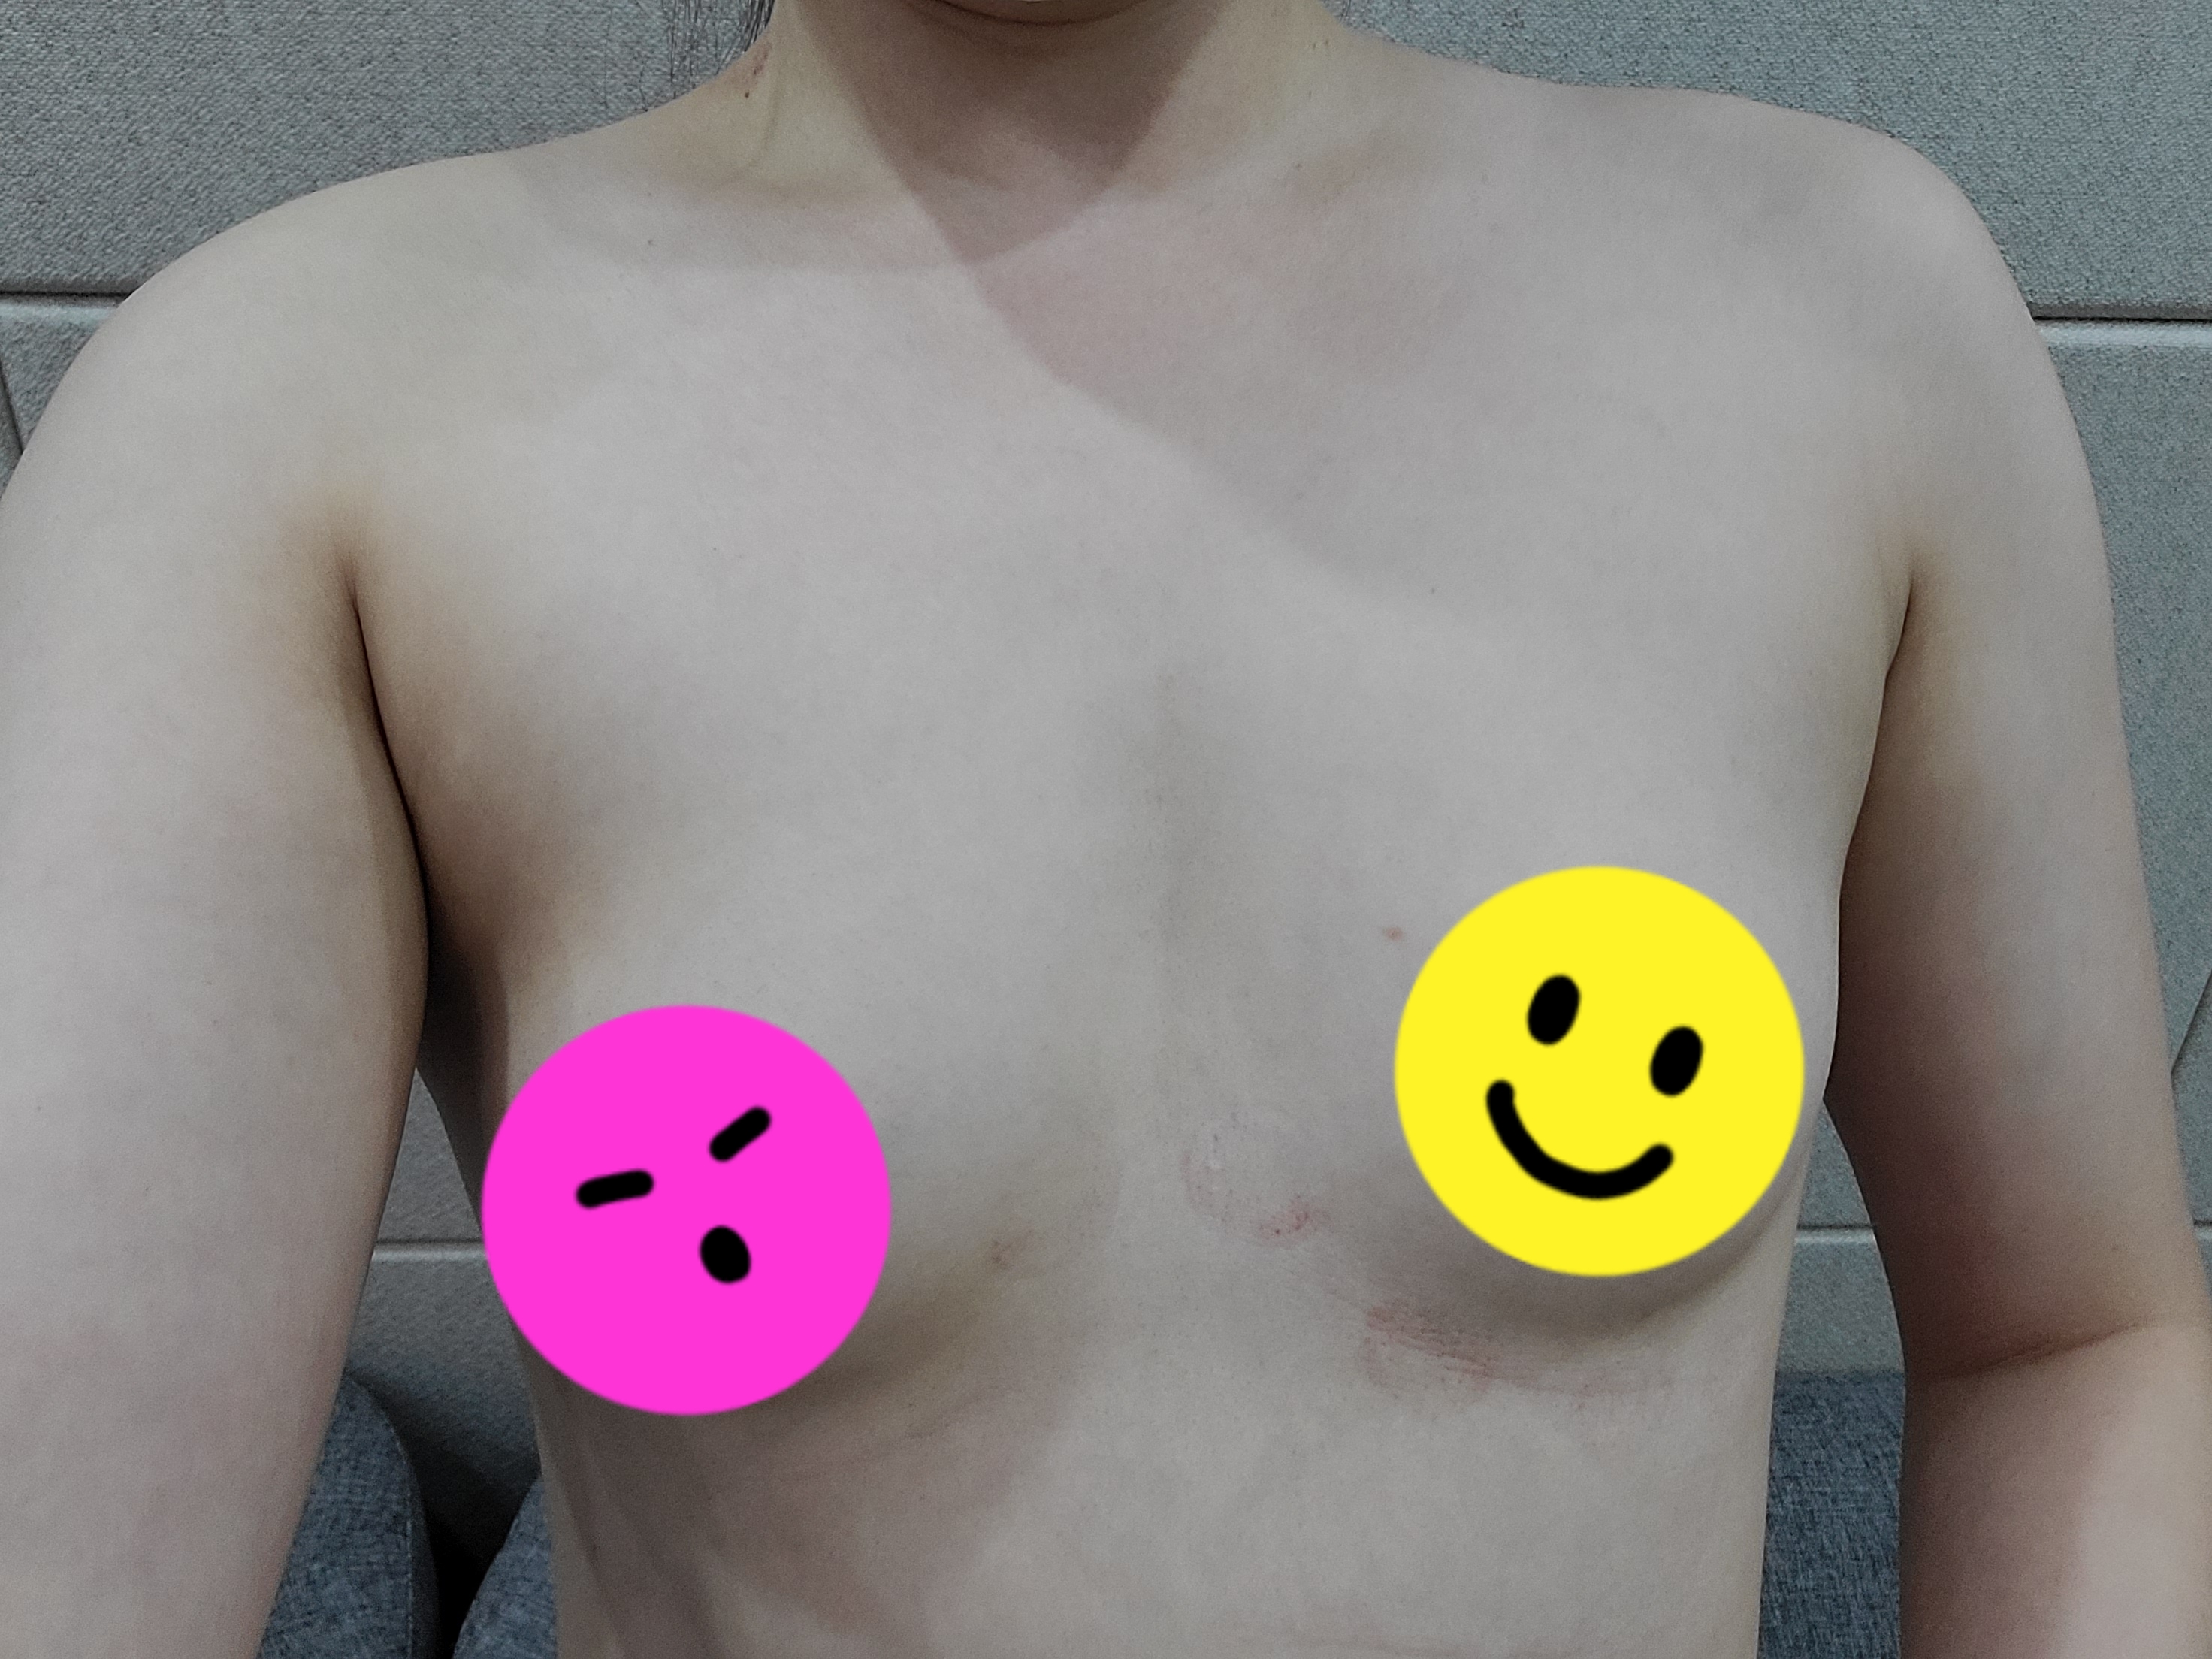 1 month after breast augmentation ♡